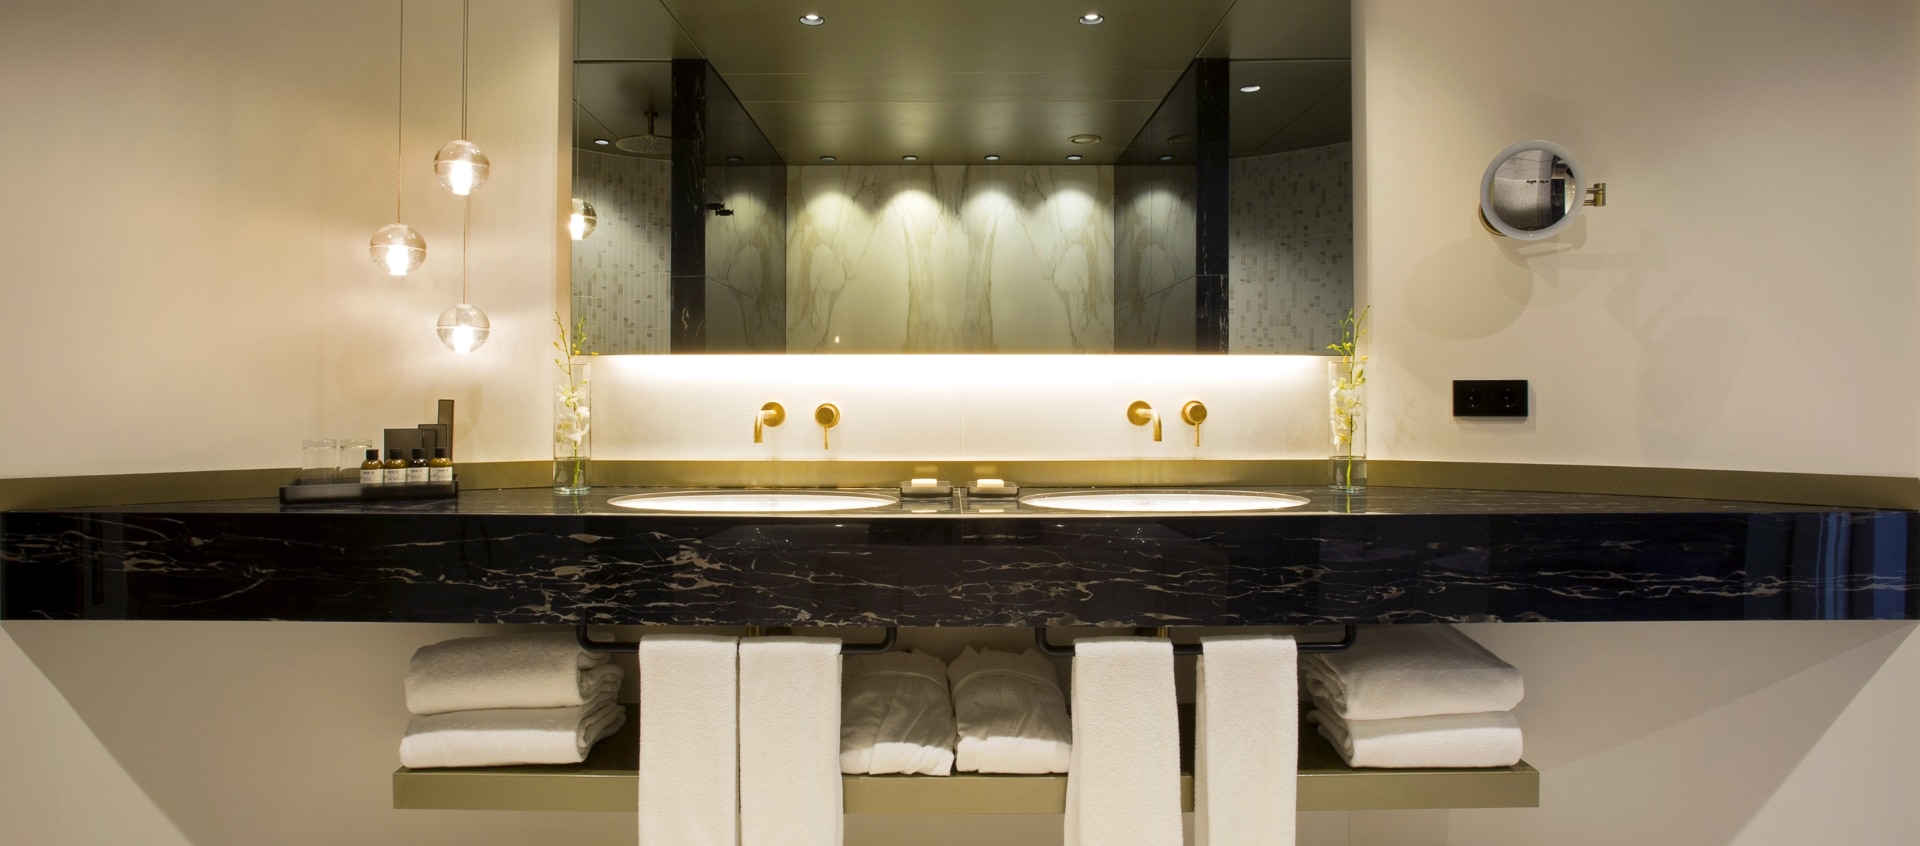 Bathroom of the Presidential Suite at the Fairmont Rey Juan Carlos I hotel in Barcelona